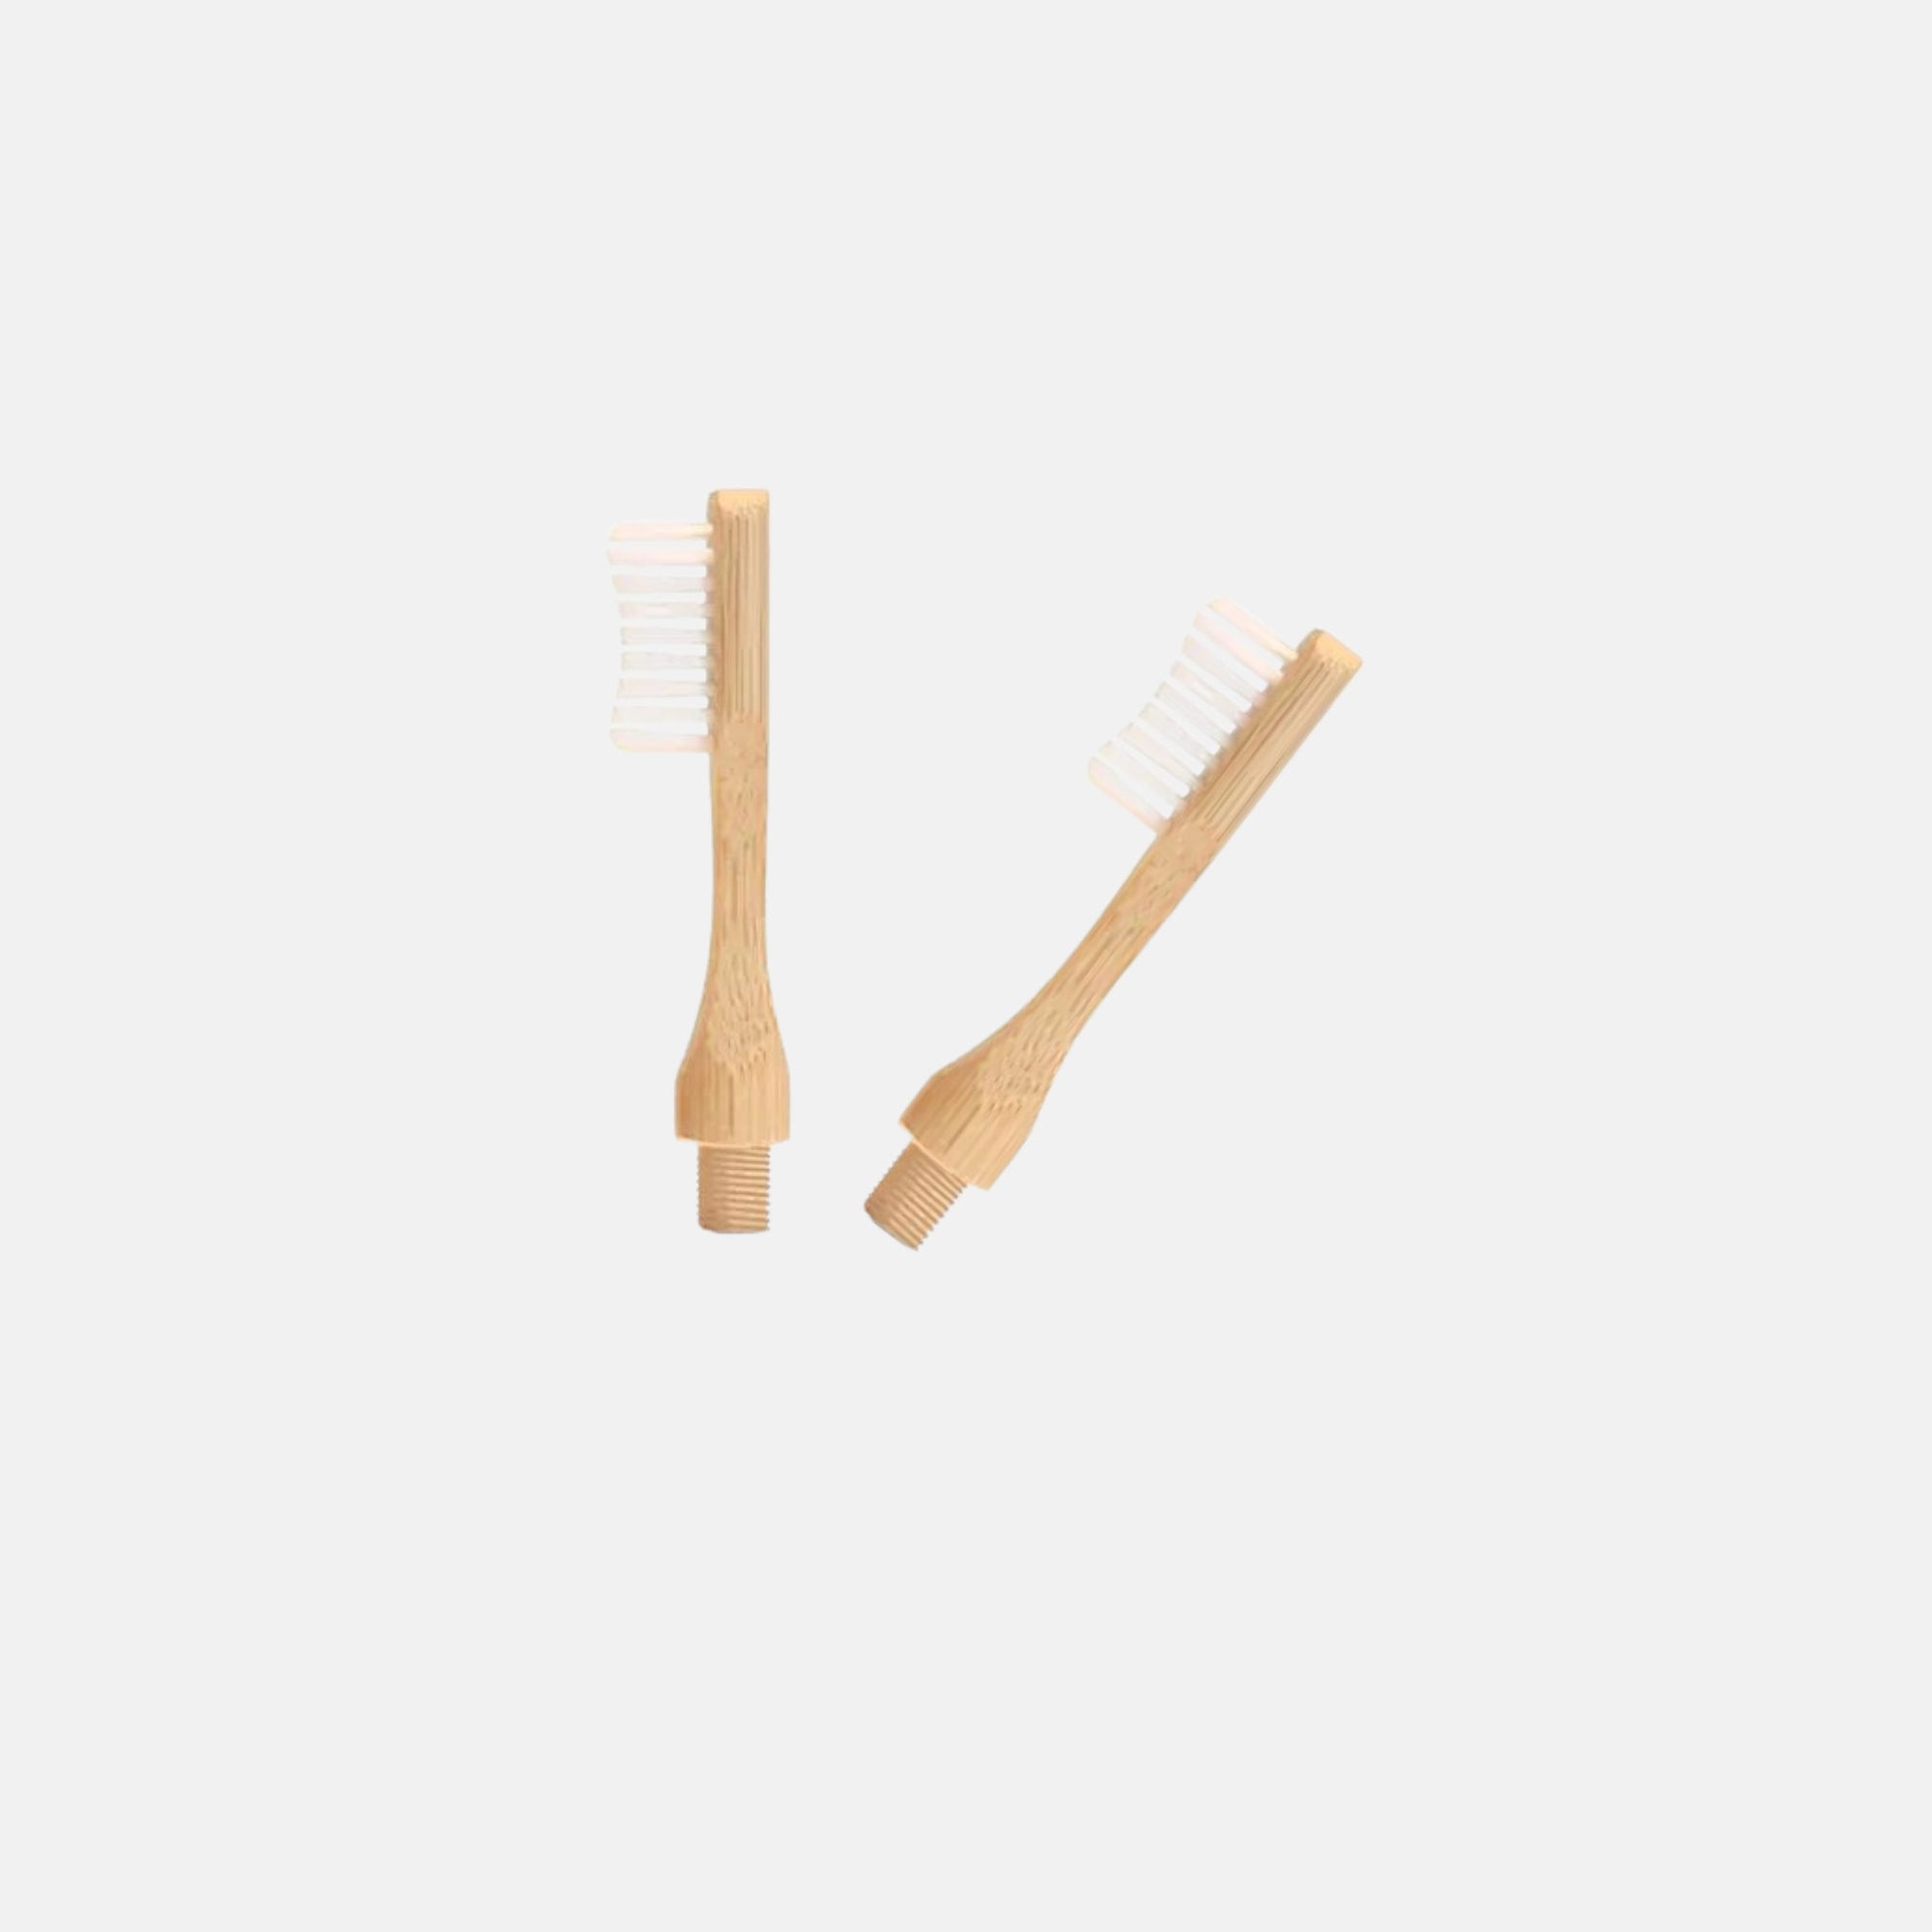 Set of two interchangeable bamboo toothbrush heads